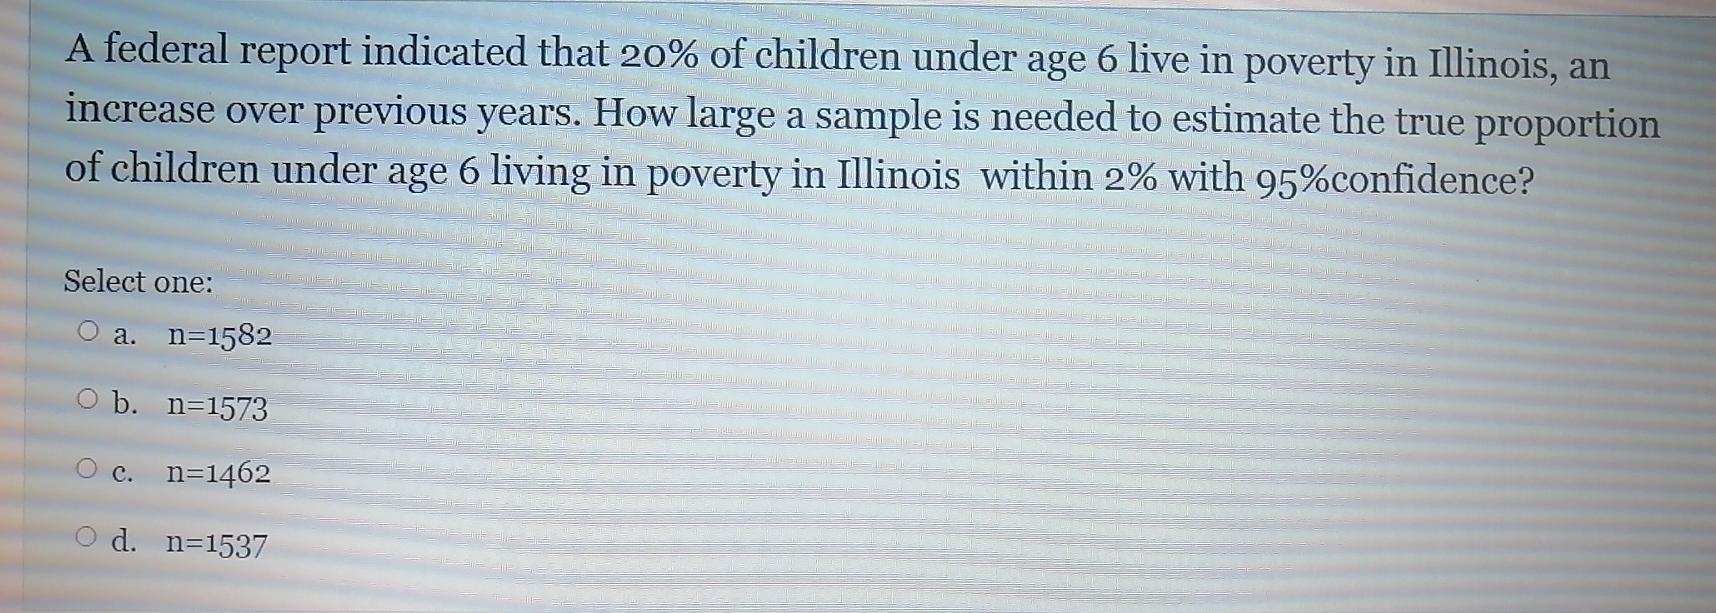 A Federal Report Indicated That 20 Of Children Under Age 6 Live In Poverty In Illinois An Increase Over Previous Years 1